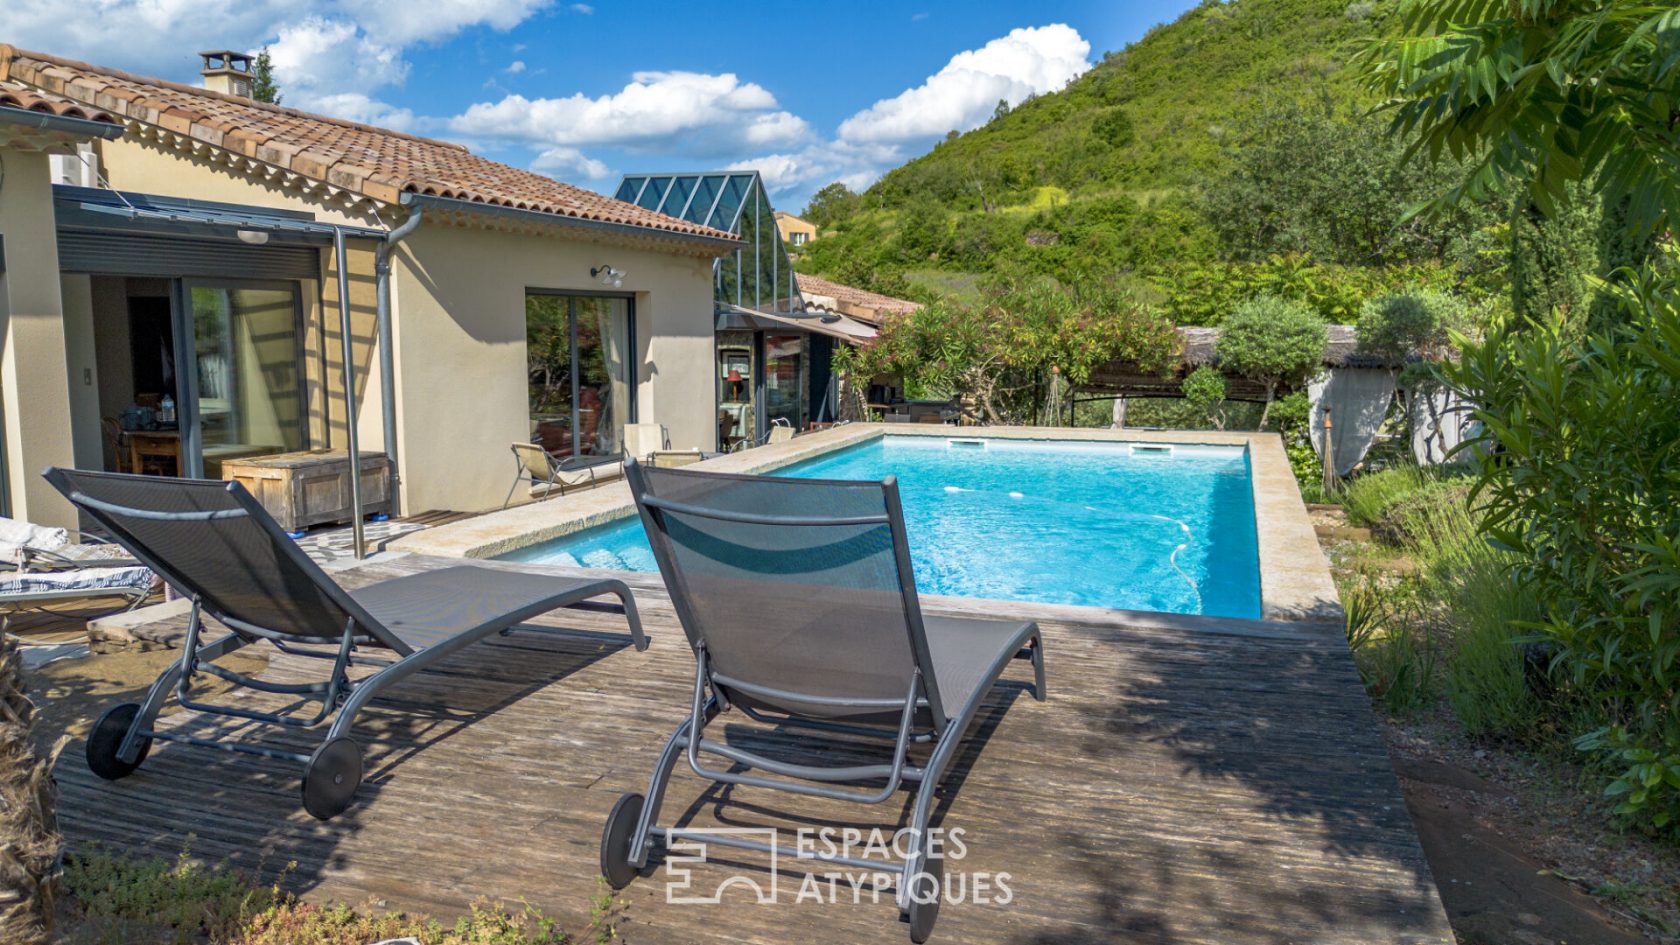 Beautiful, secret contemporary property at the crossroads of the Cévennes and southern Ardèche